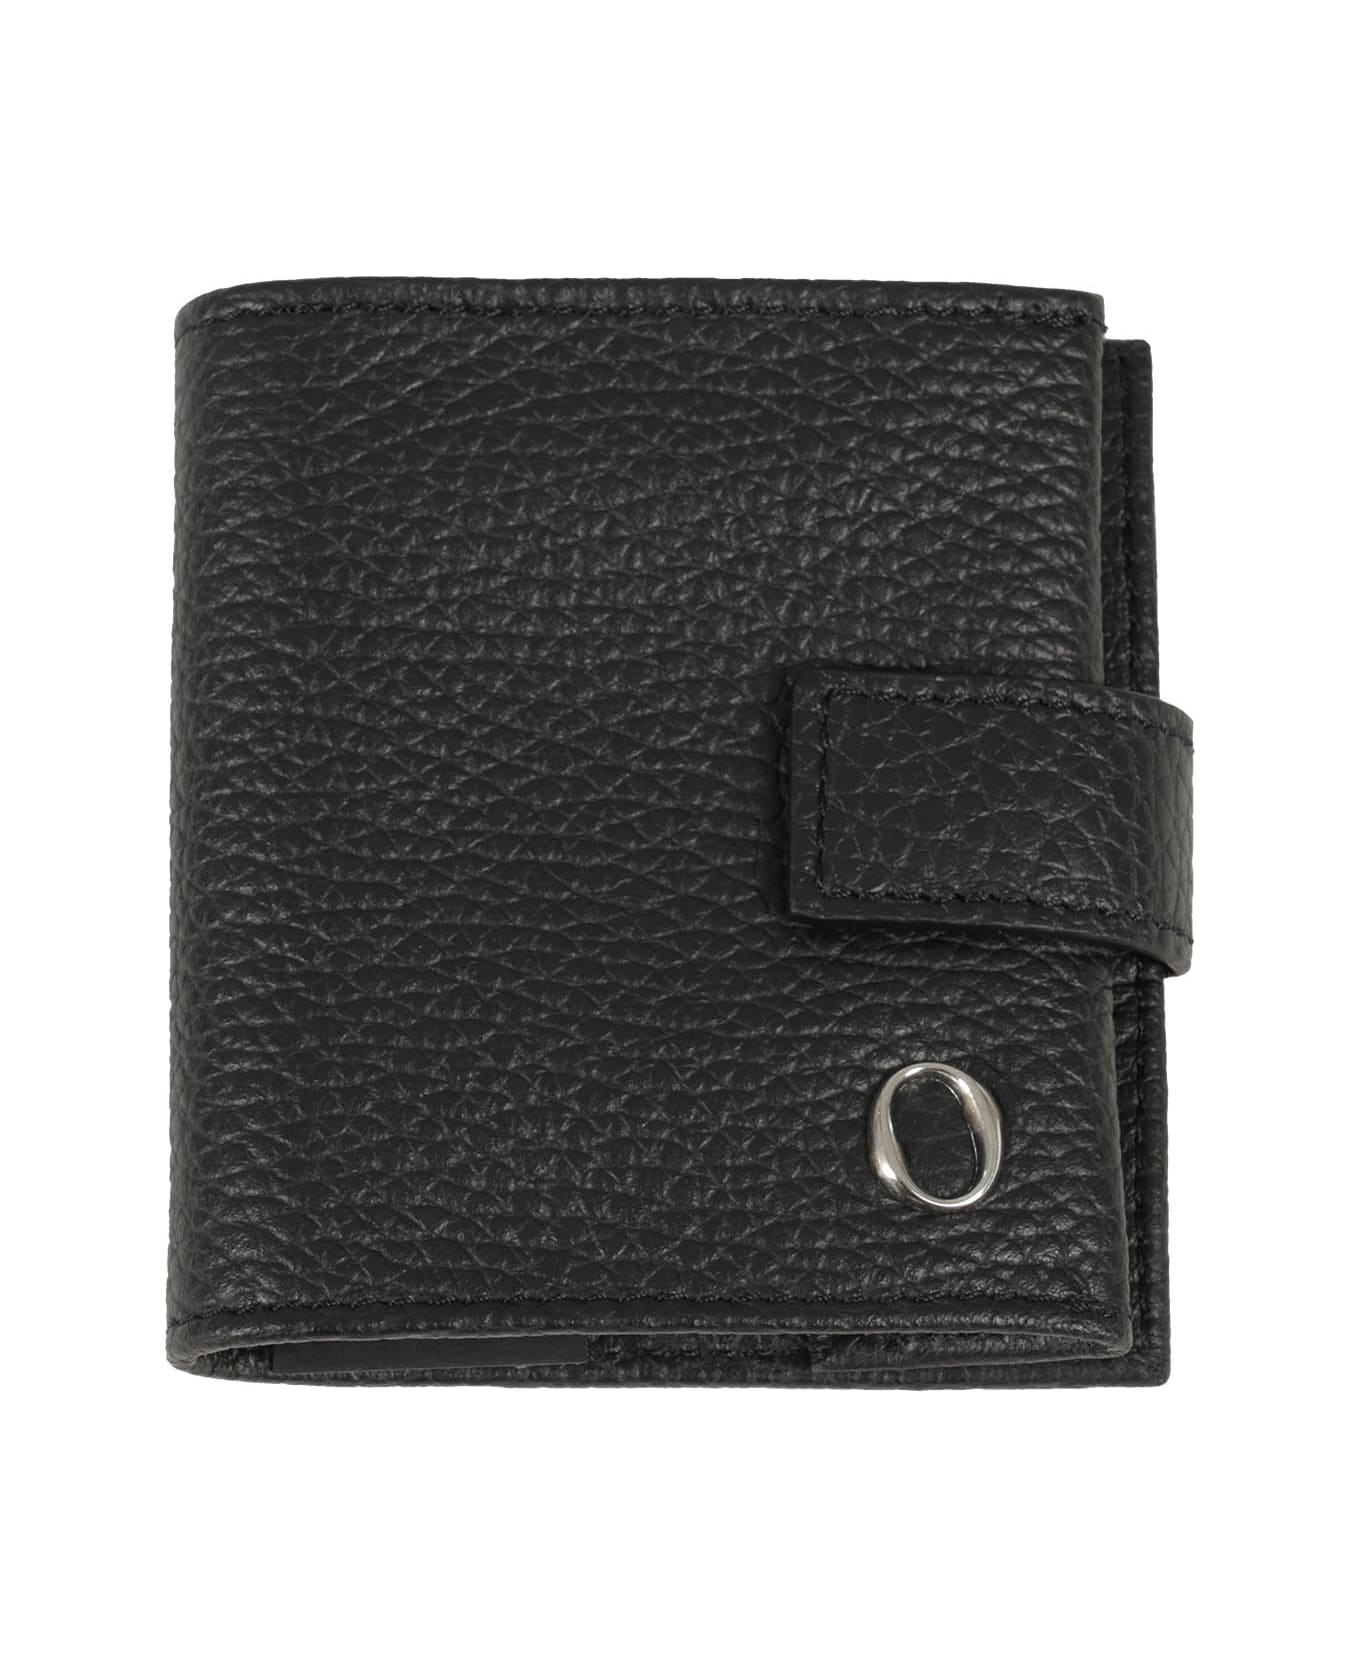 Orciani Leather Wallet - Ner Nero 財布